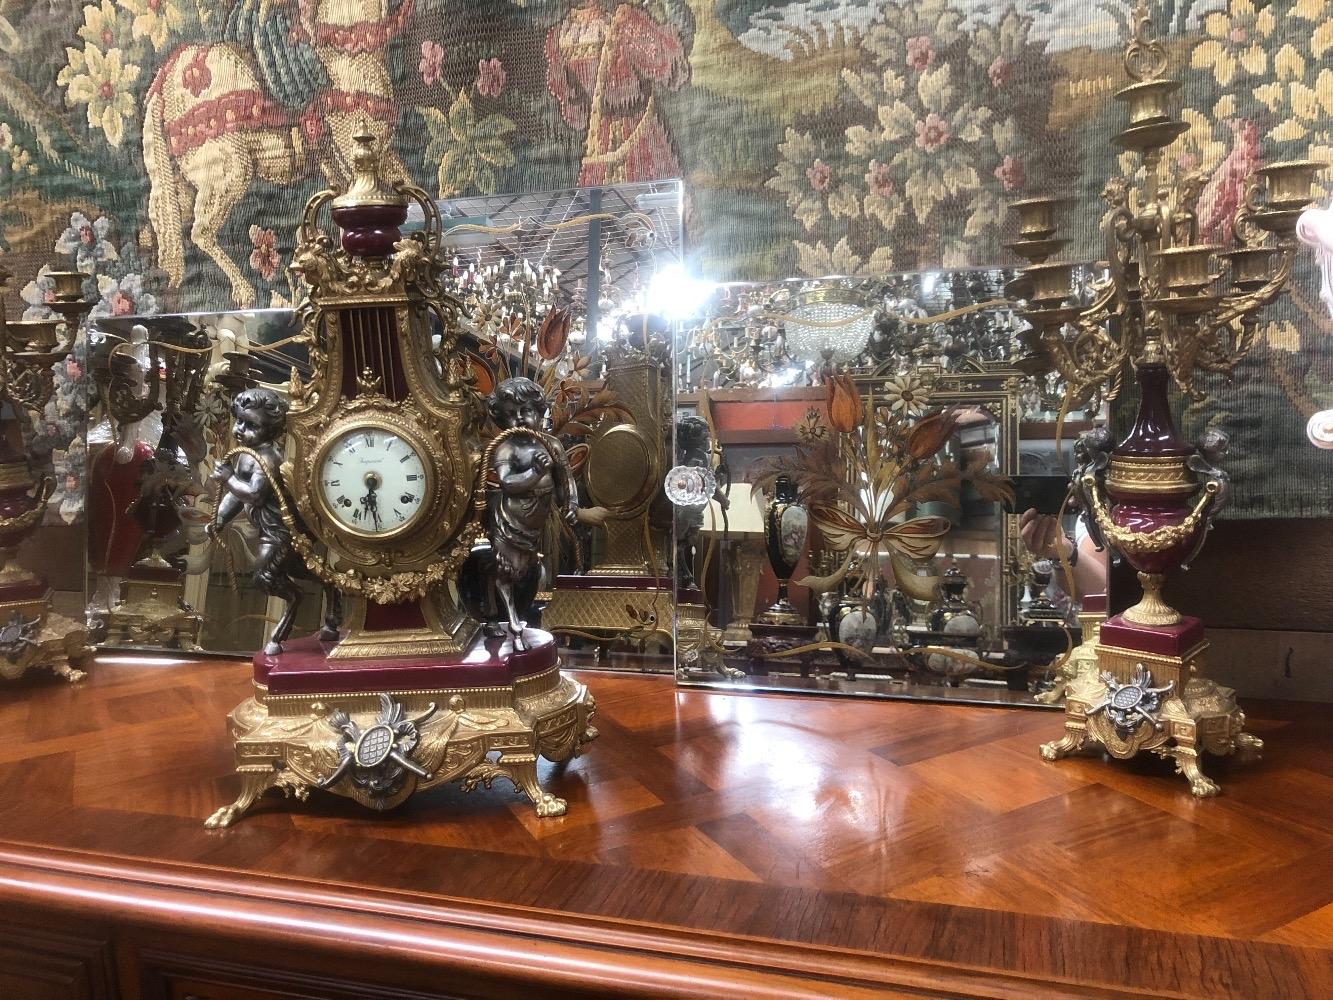 Italy imperial clockset with putties